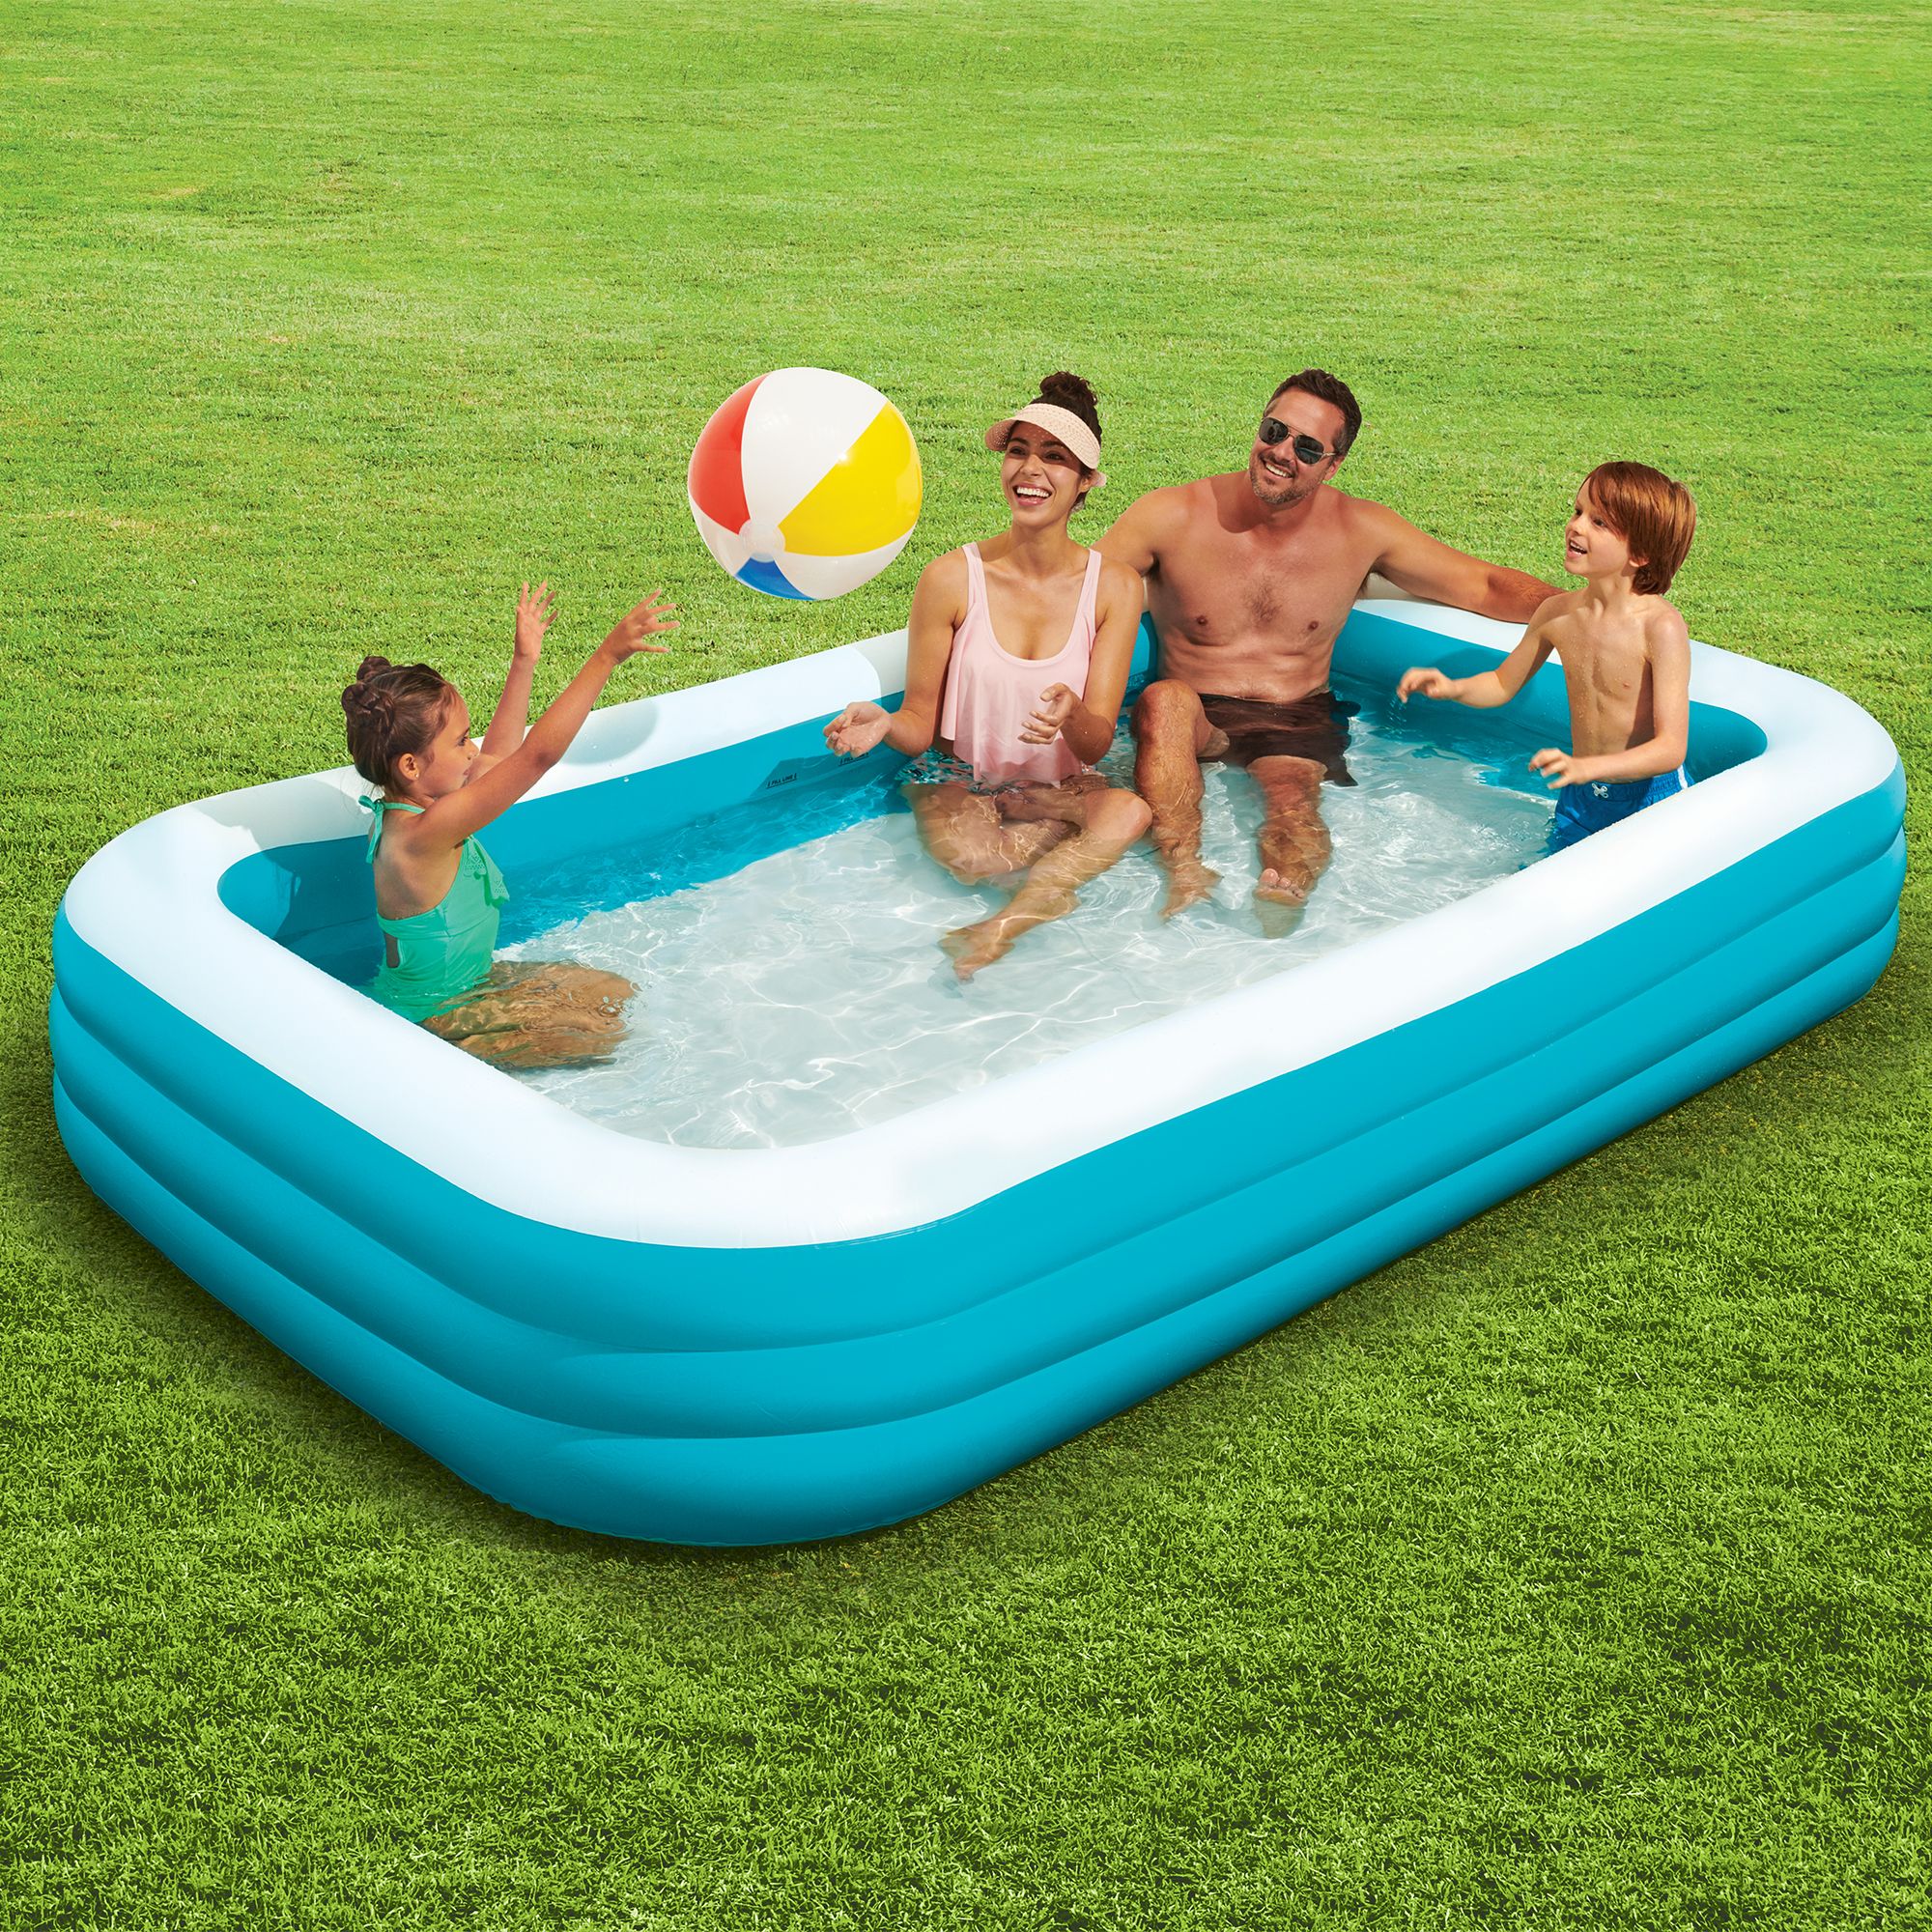 Play Day Rectangular Inflatable Family Pool, 120" x 72" x 22" - image 2 of 6